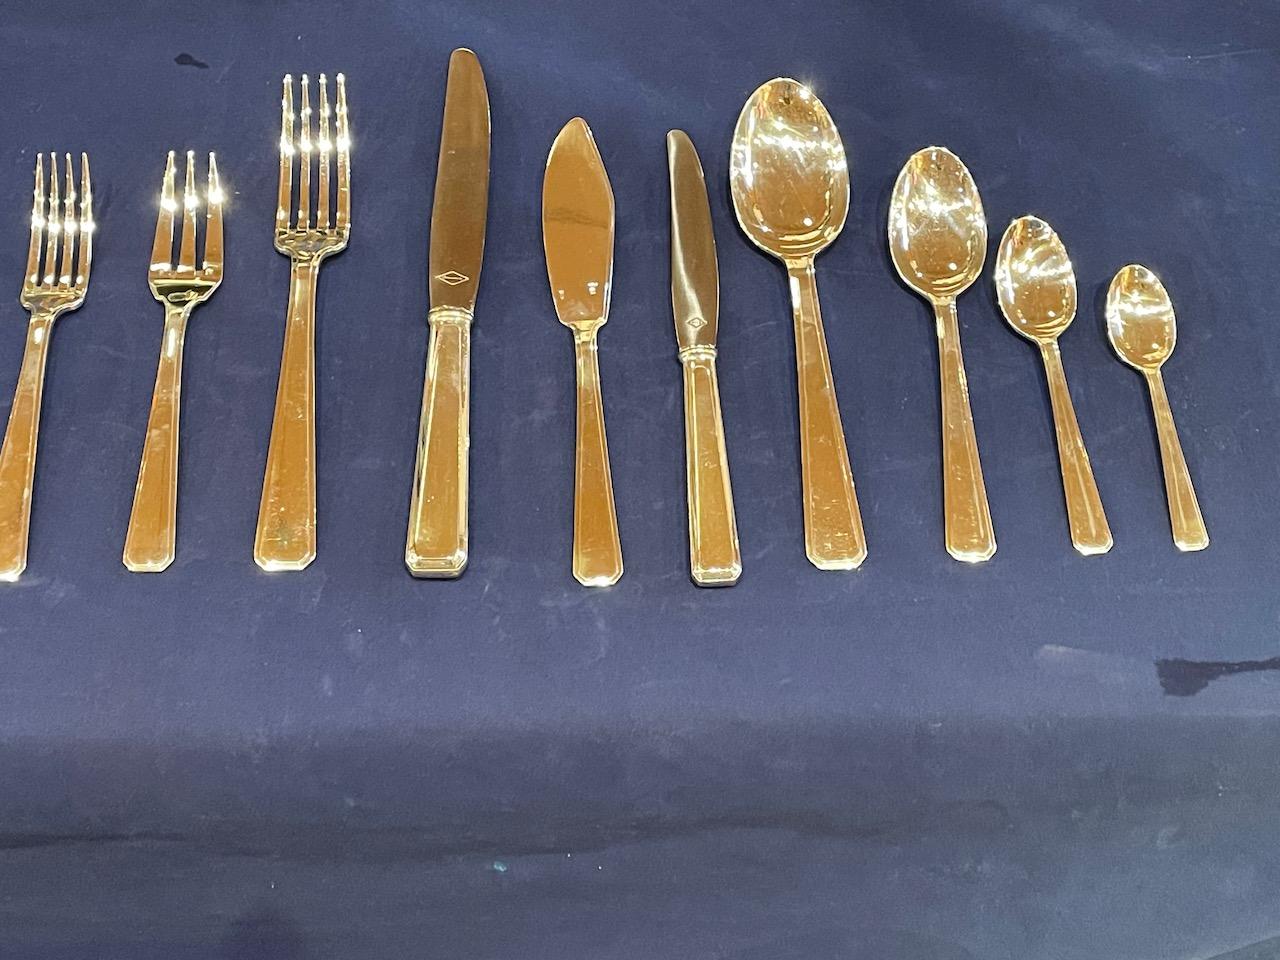 Complete Art Deco Silverware Service for 12 by Ravinet d'Enfert of France 2